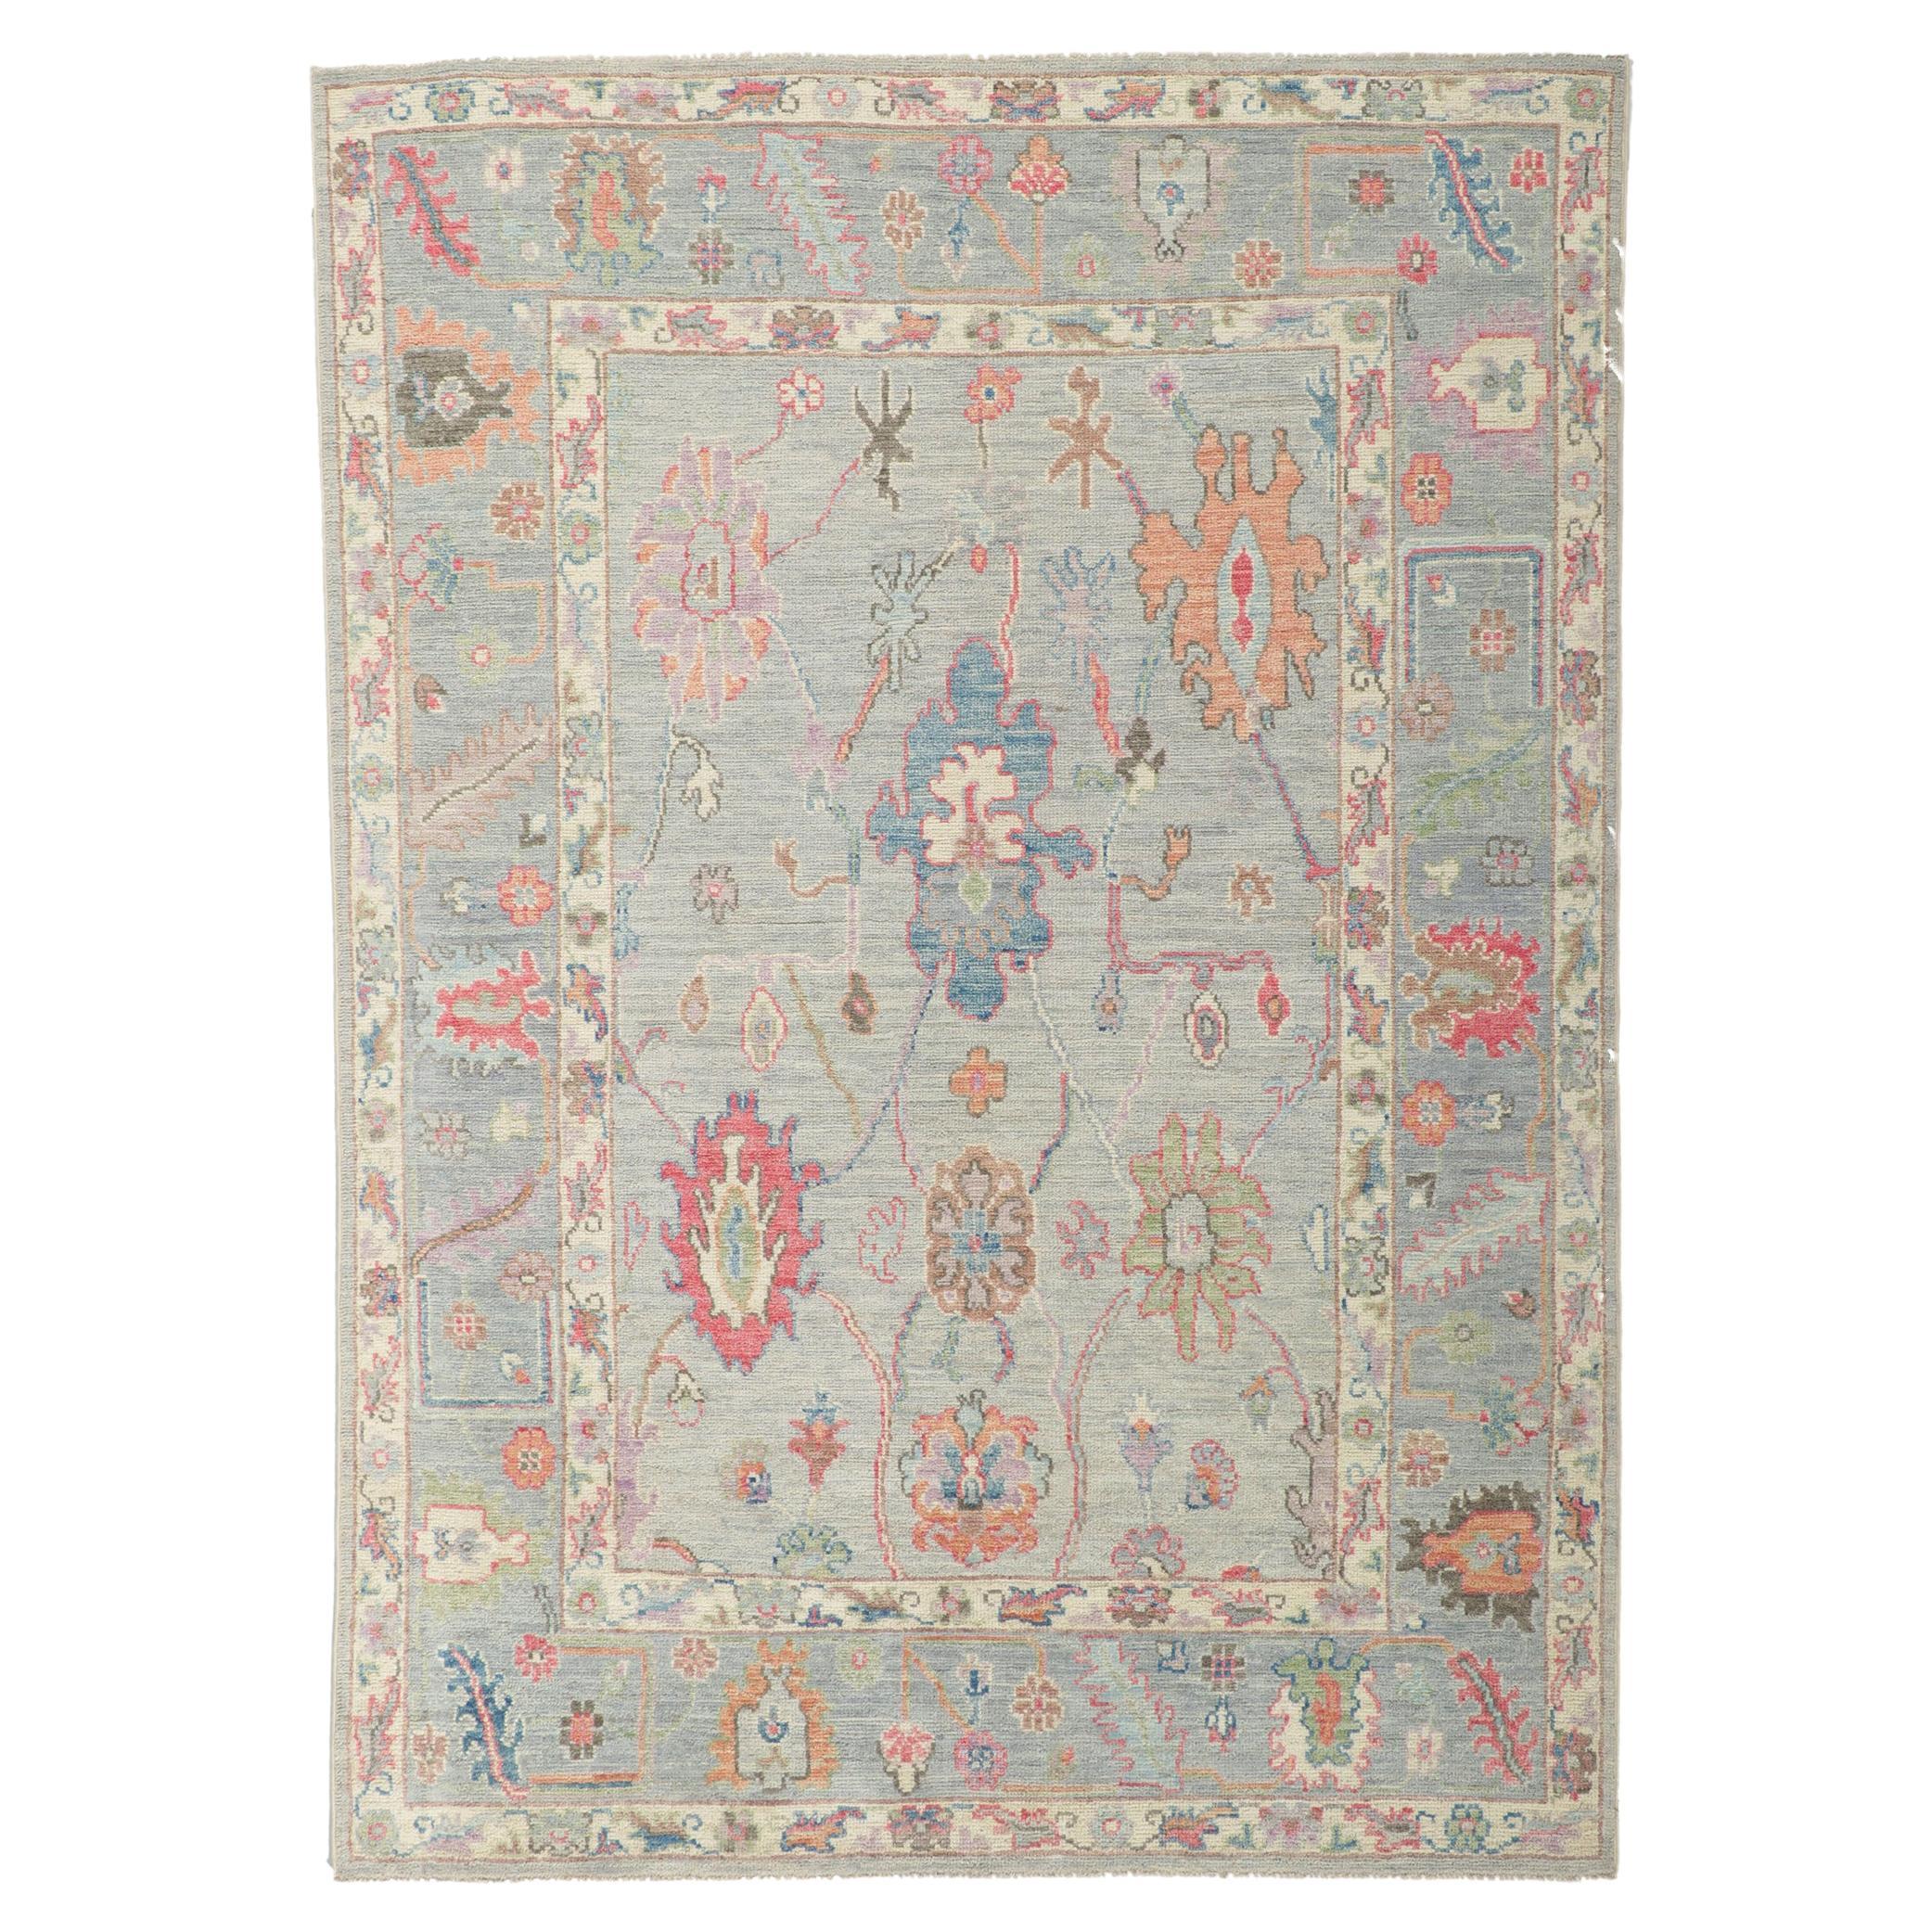 New Modern Style Oushak Rug with Soft Colors